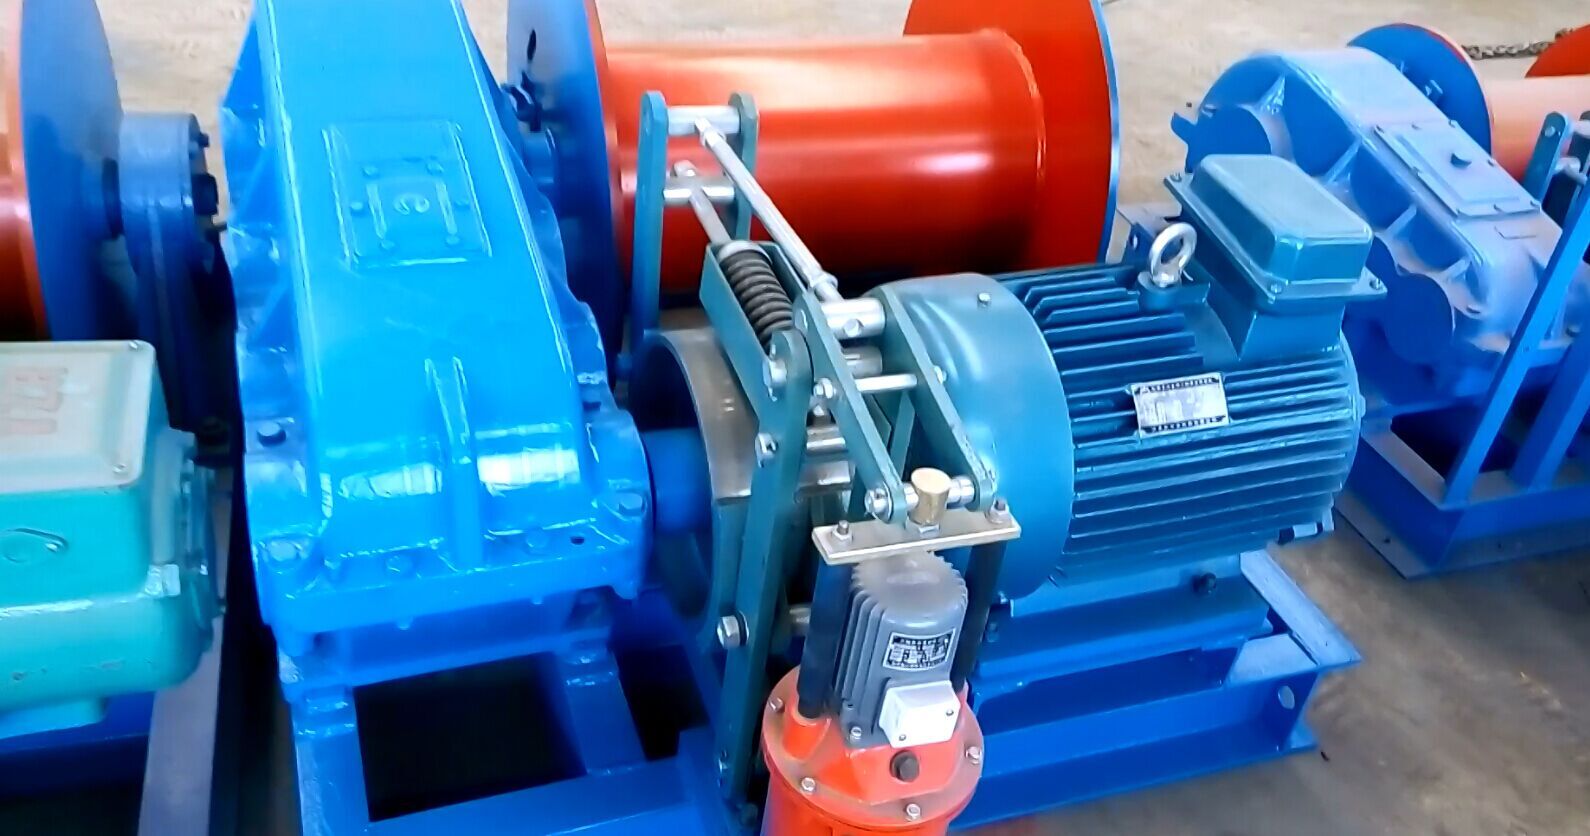 High speed electric winch 